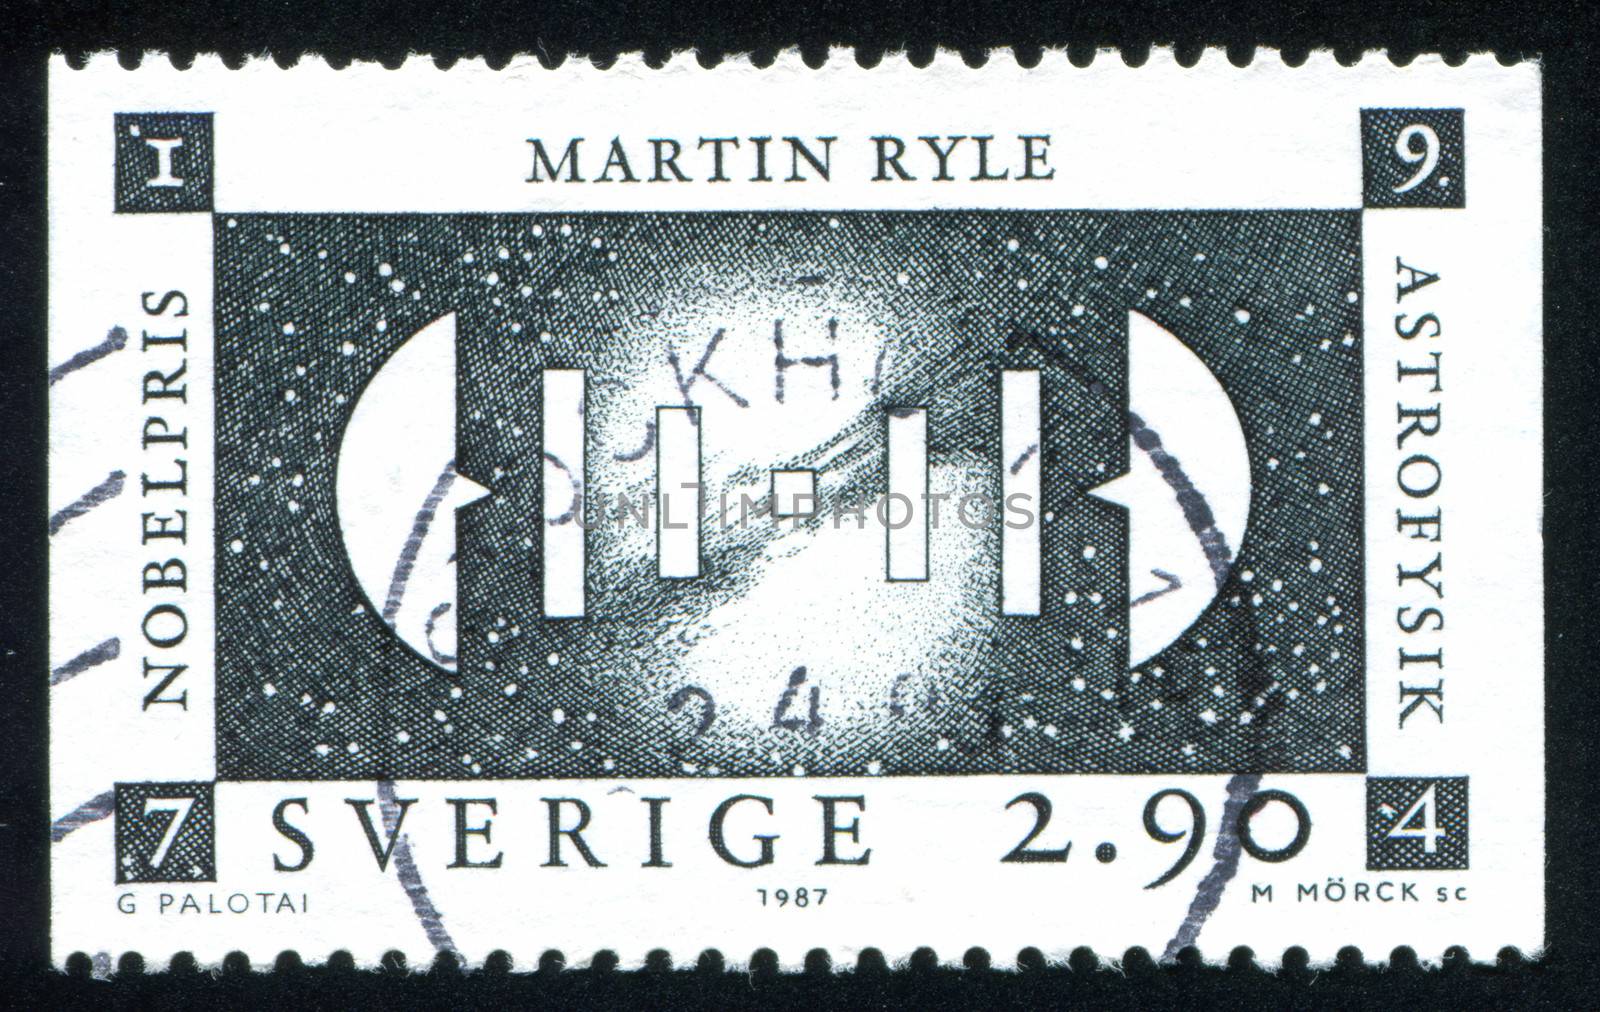 Martin Ryle by rook